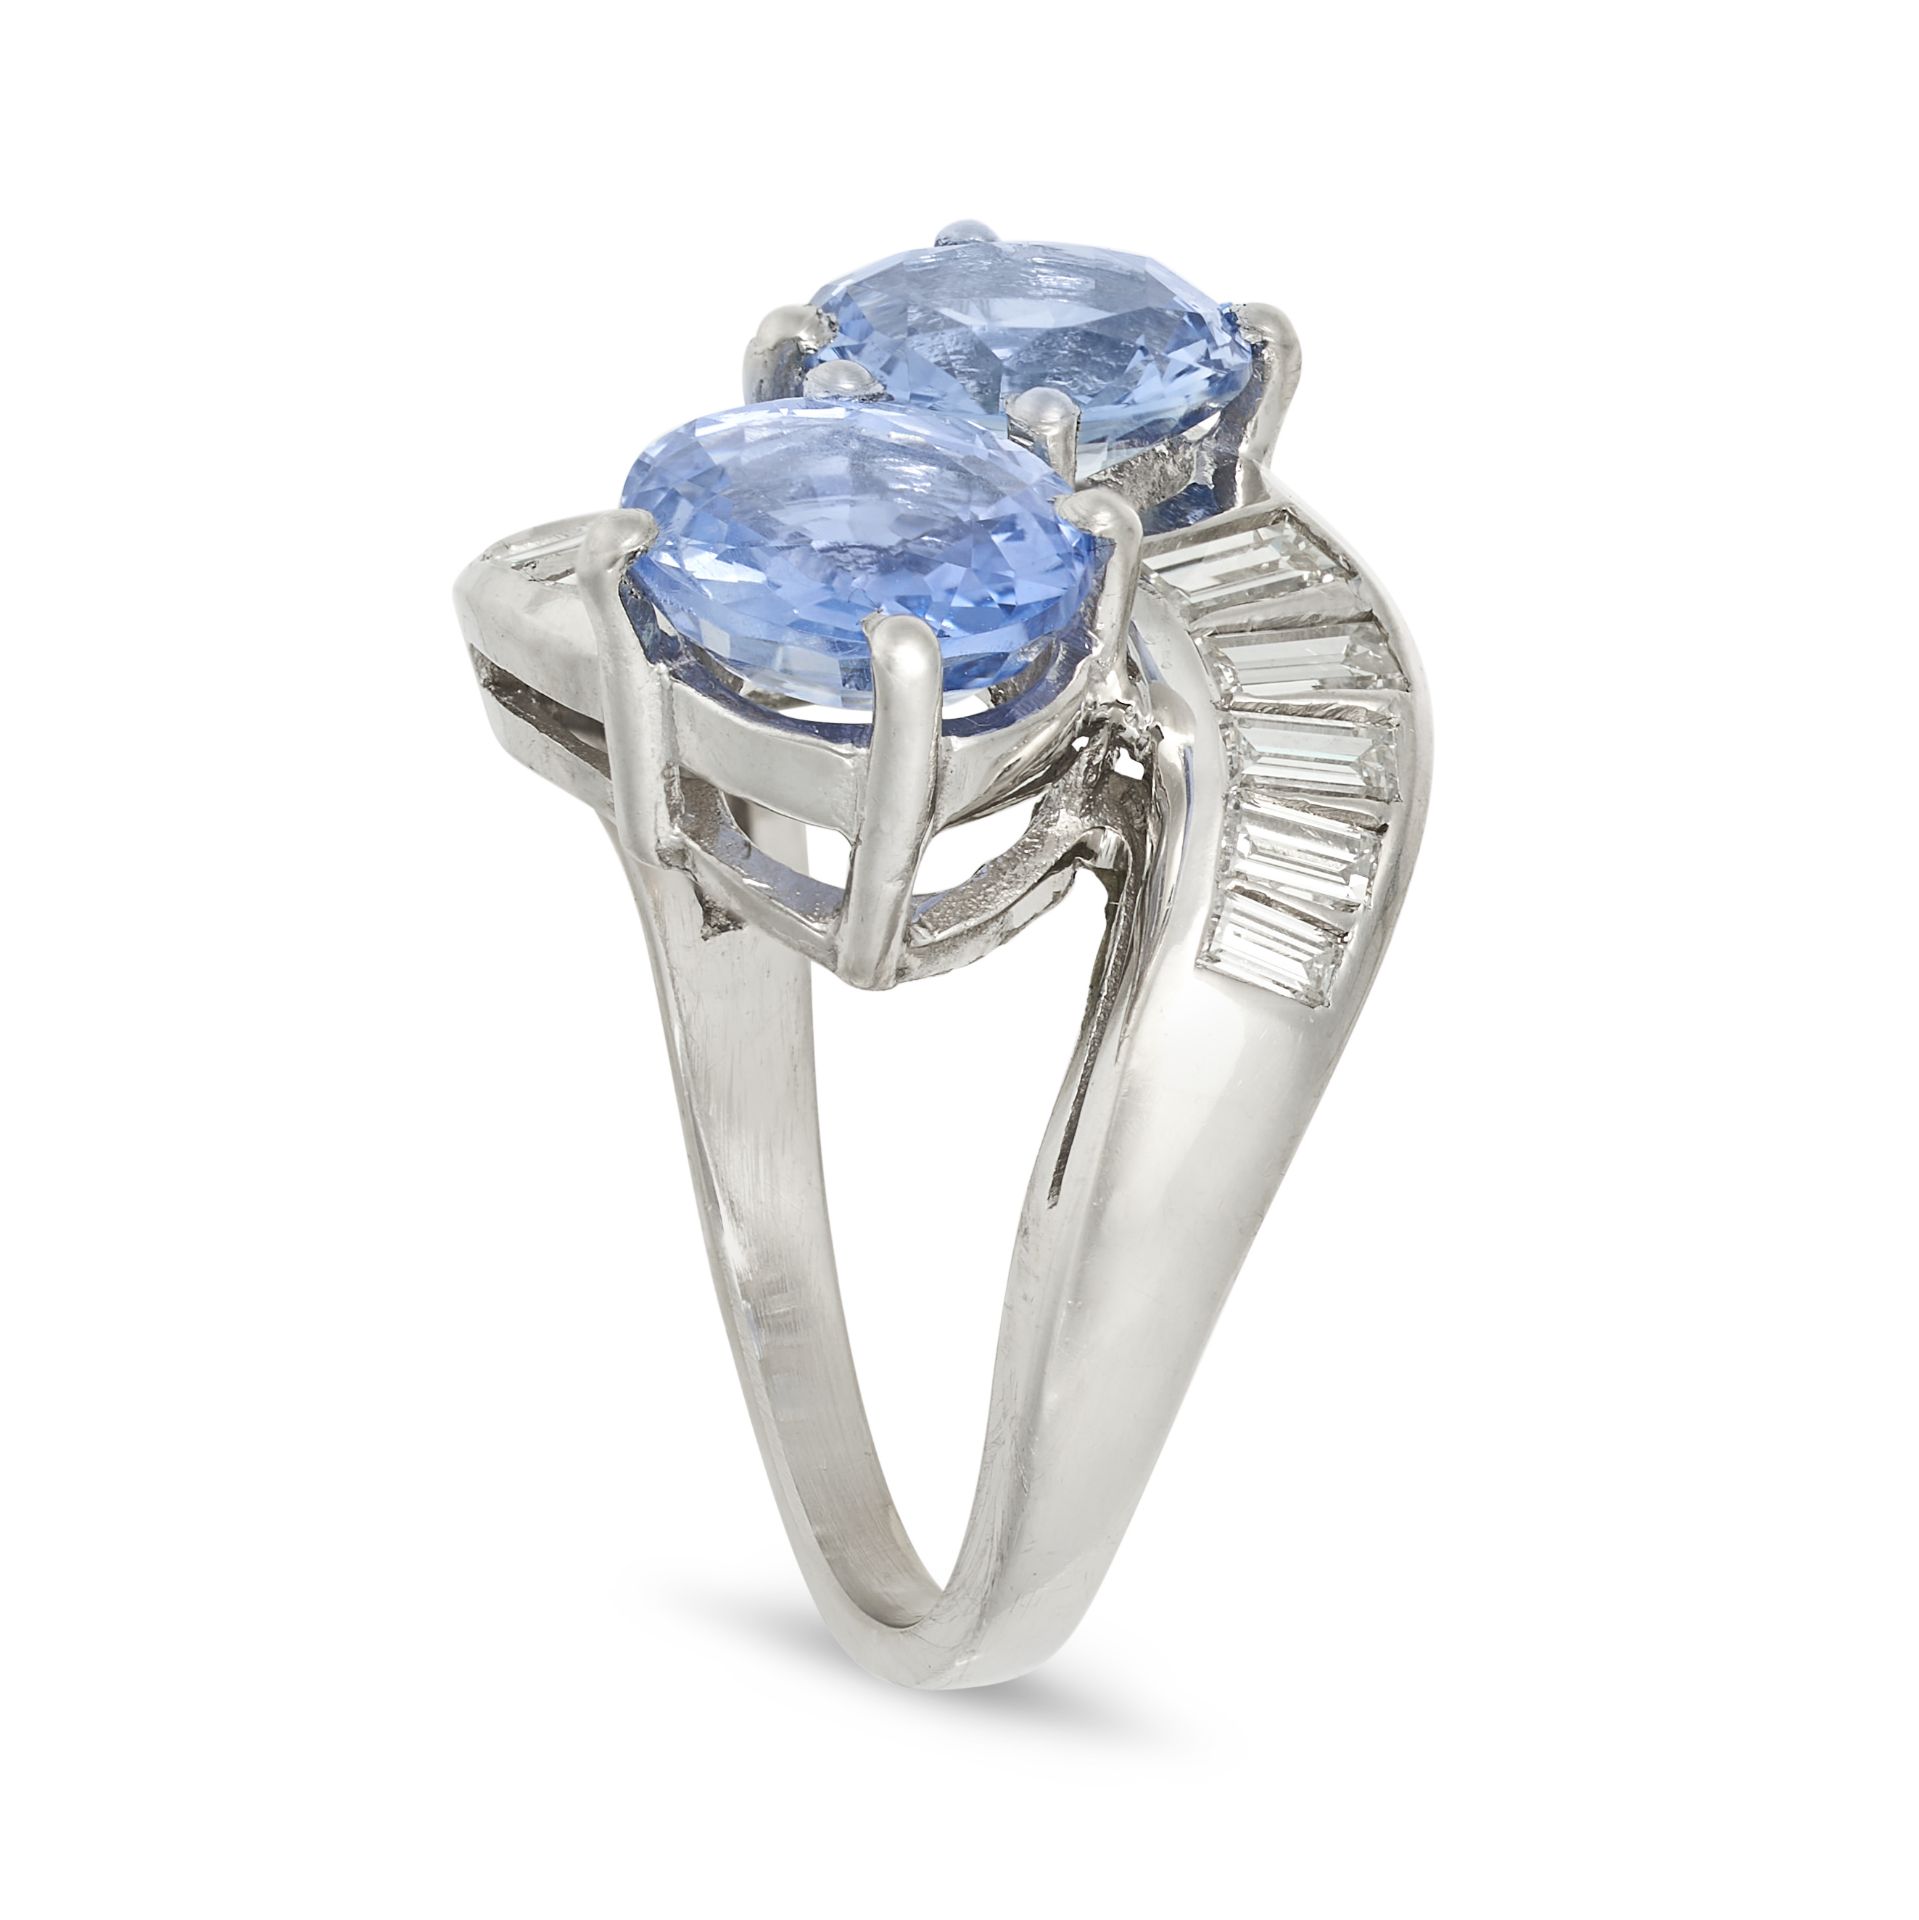 A SAPPHIRE AND DIAMOND TOI ET MOI RING in platinum, set with two round cut sapphires accented by ... - Image 2 of 2